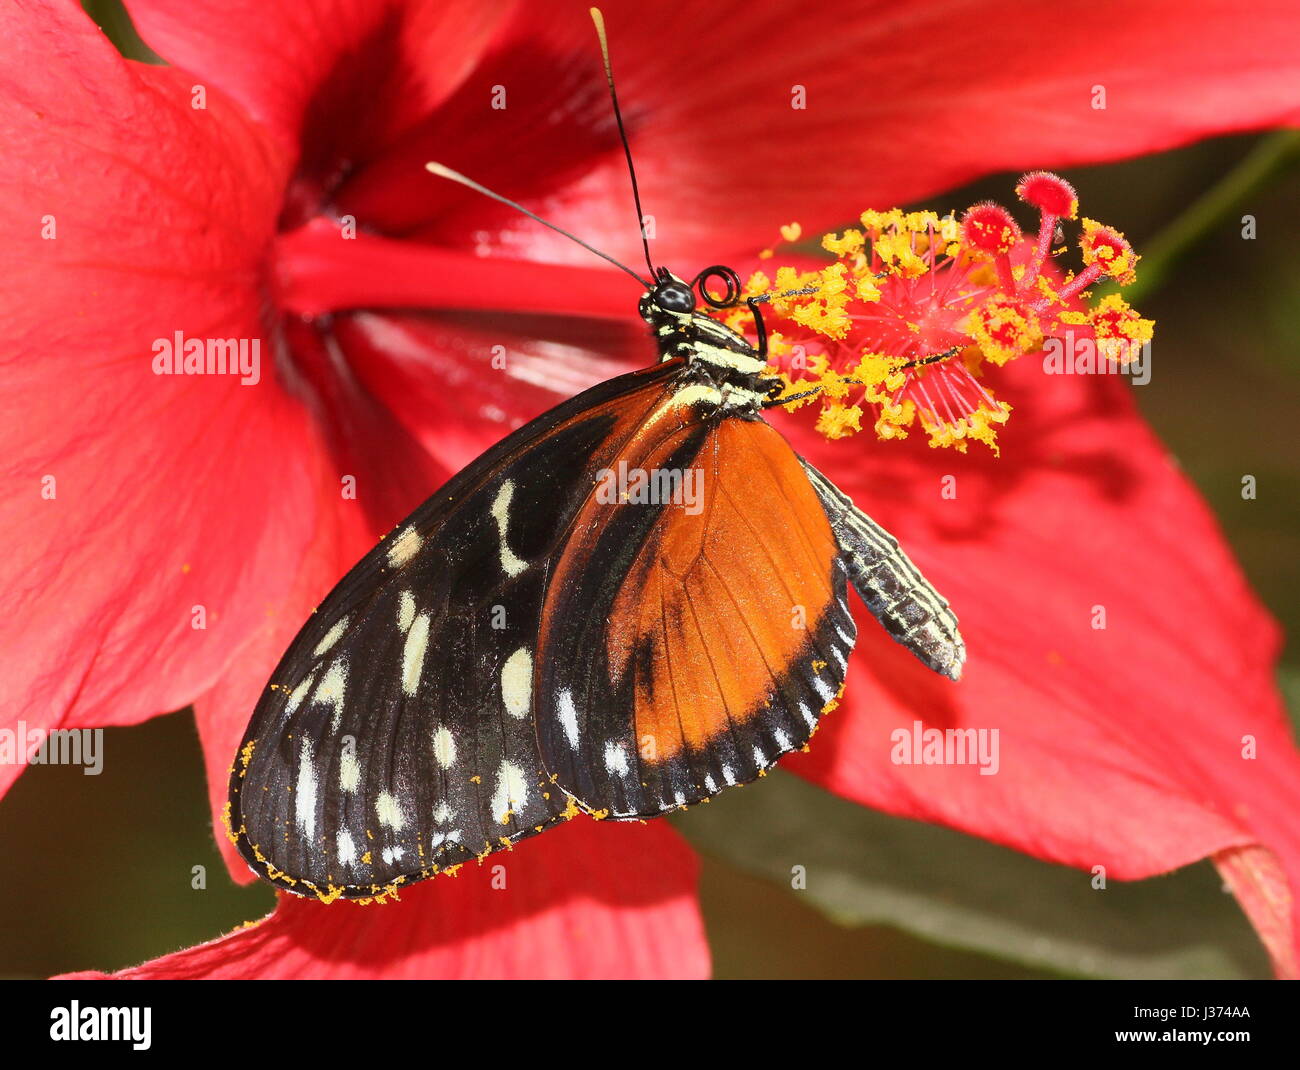 New world Hecale or Tiger Longwing (Heliconius Hecale) feeding on a hibiscus flower. A.k.a. Golden Heliconian butterfly, found from Mexico to Peru. Stock Photo